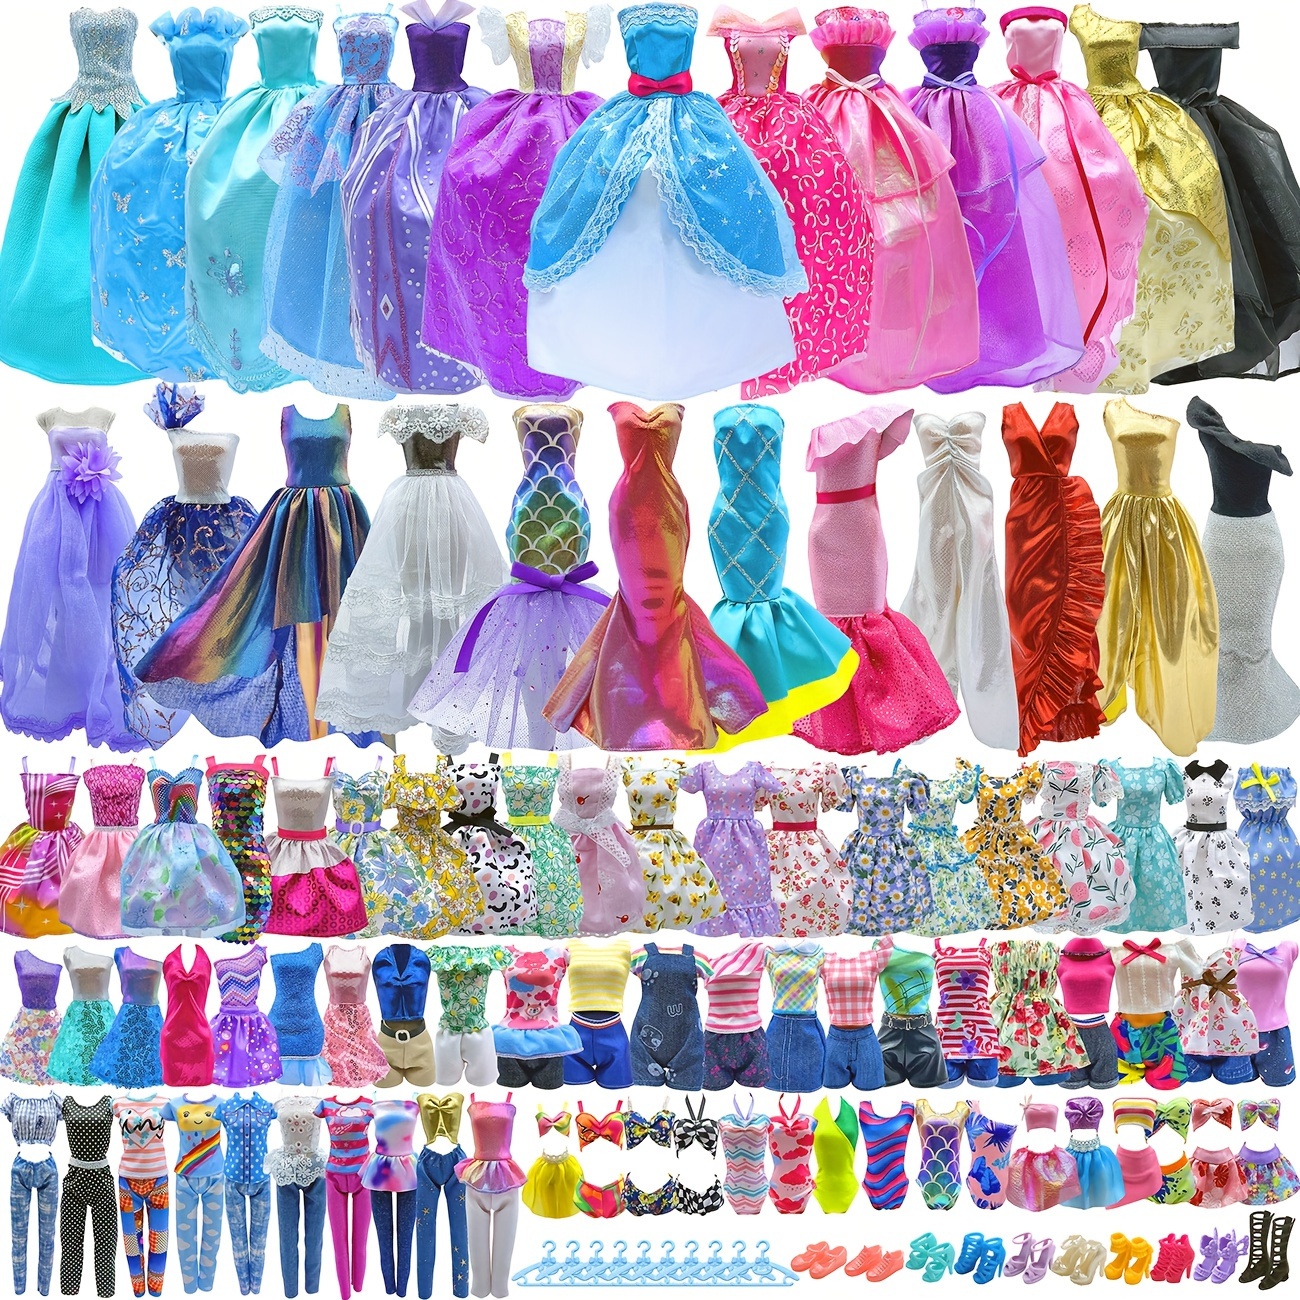 1 12 scale accessory Doll clothes large dress for 6 female body